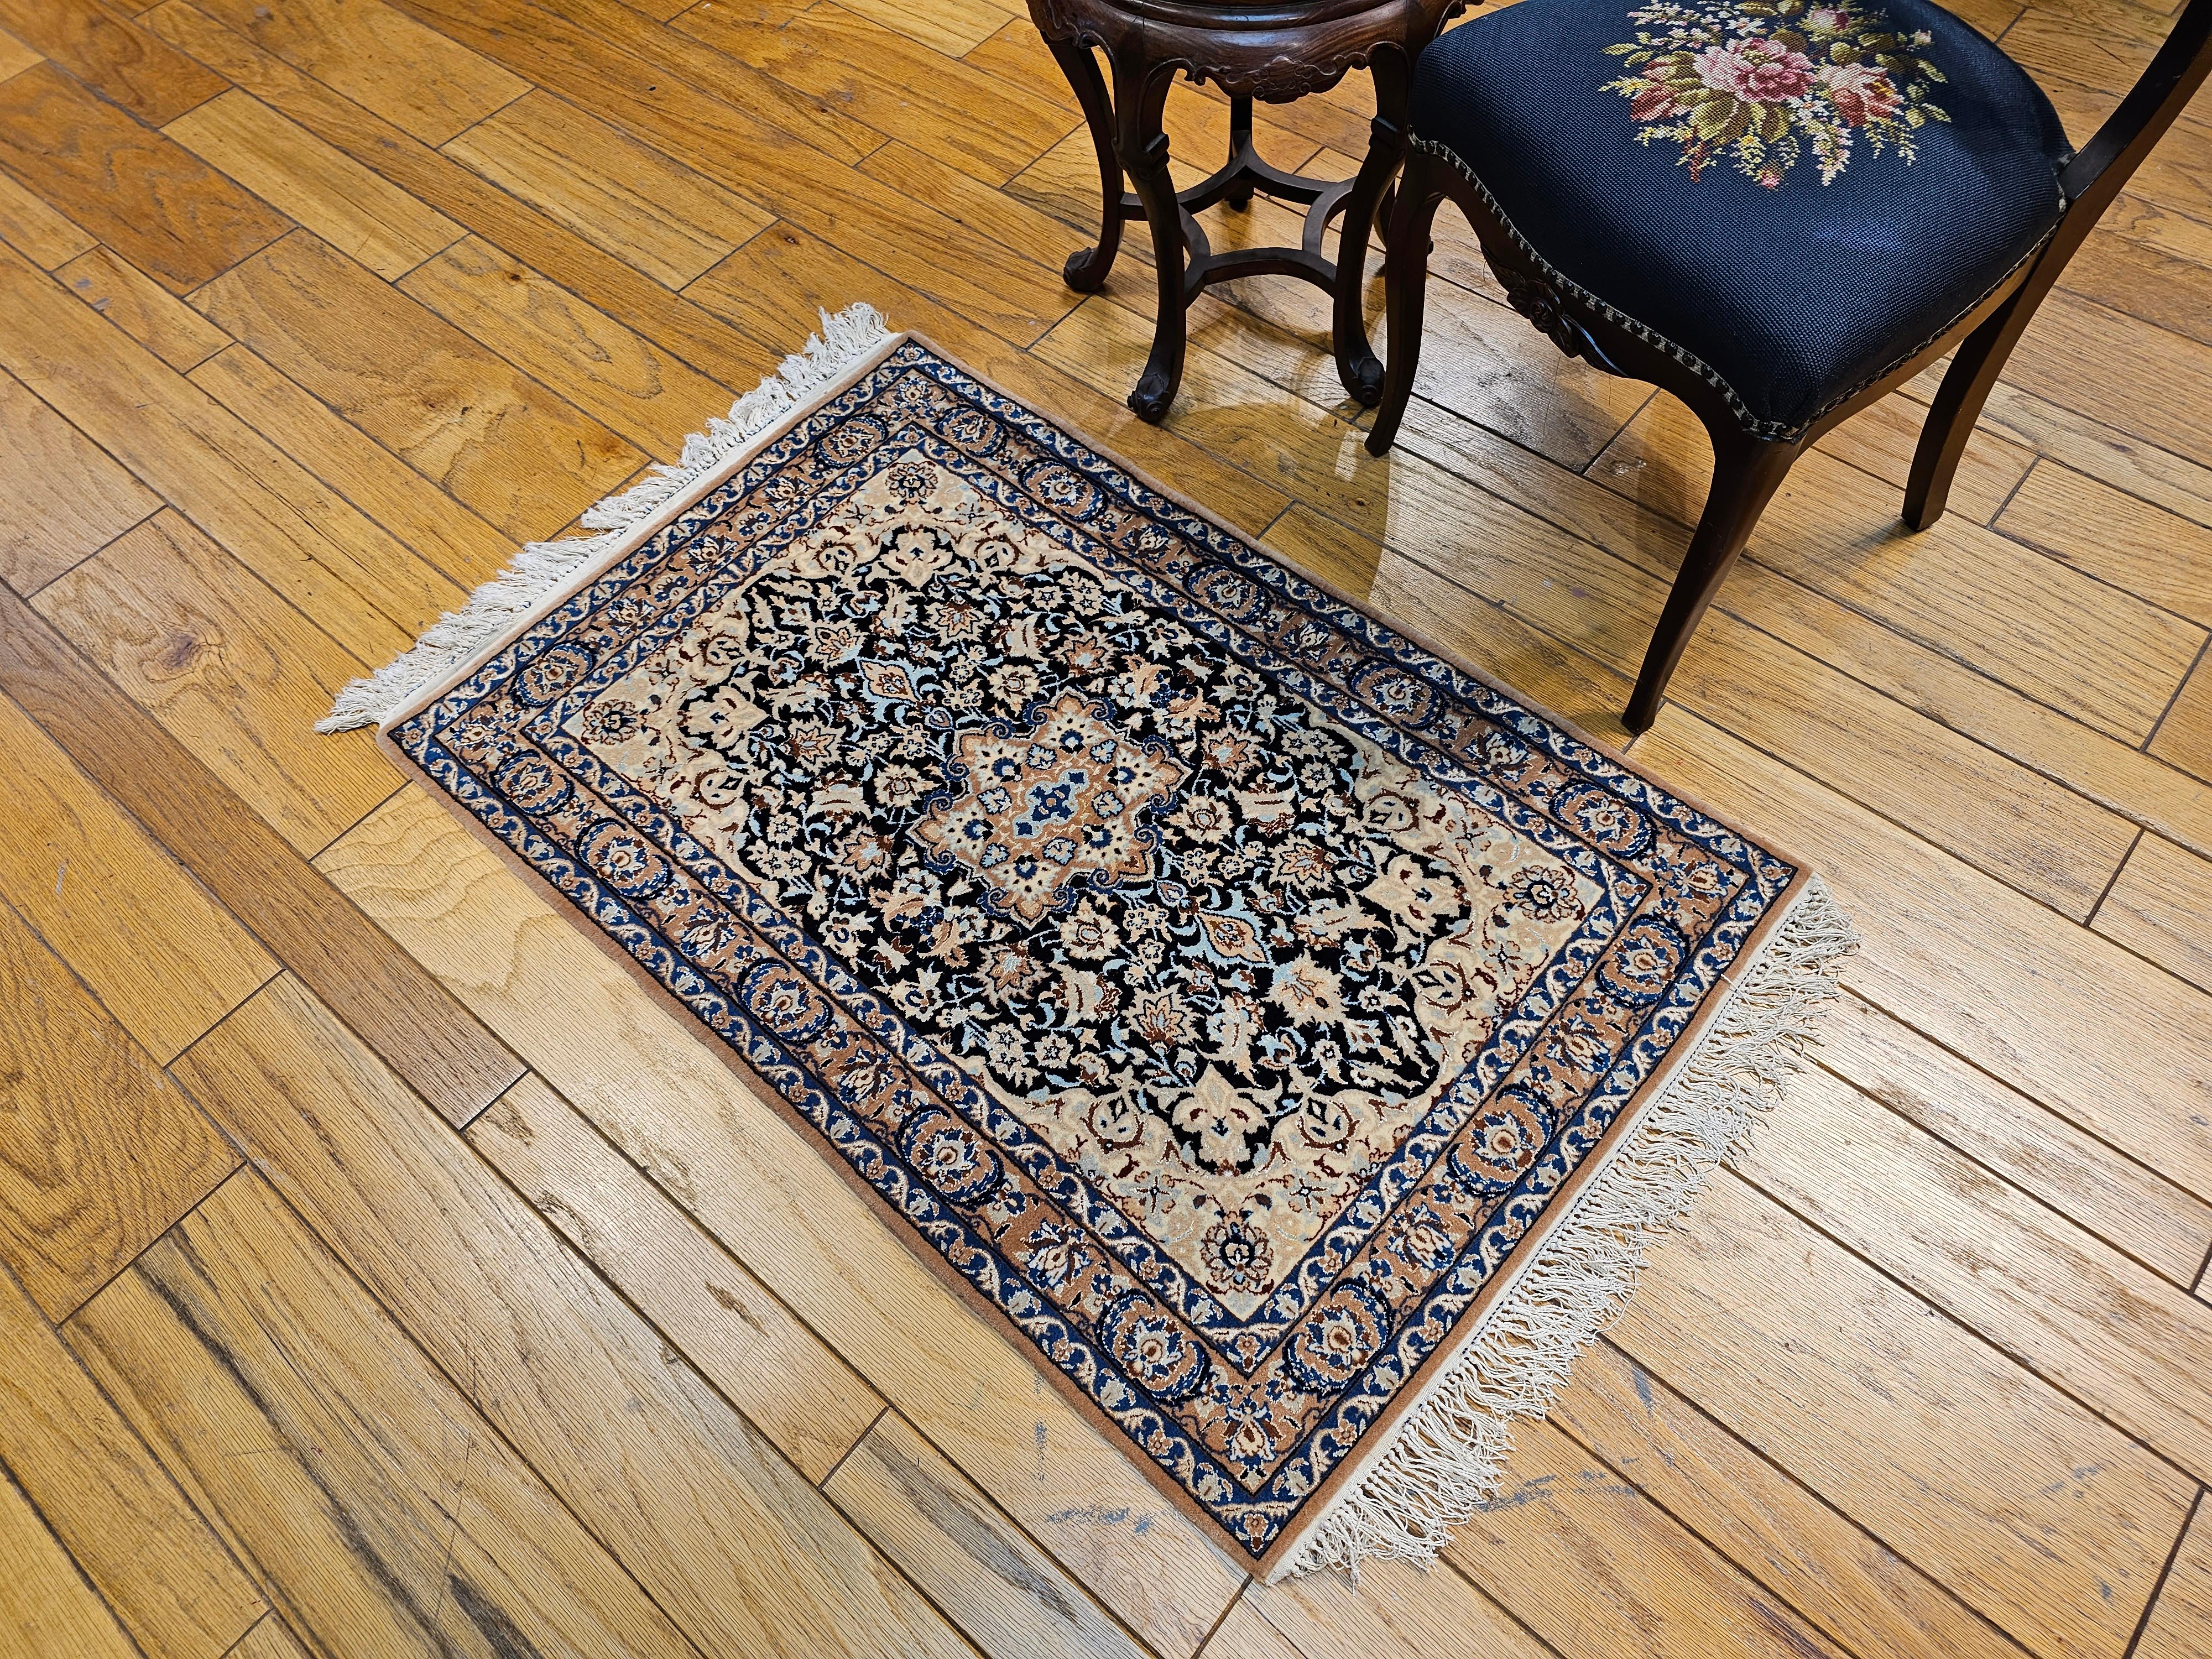 Wool Vintage Persian Nain Area Rug in Tiffany Blue, French Blue, Navy Blue, Caramel For Sale